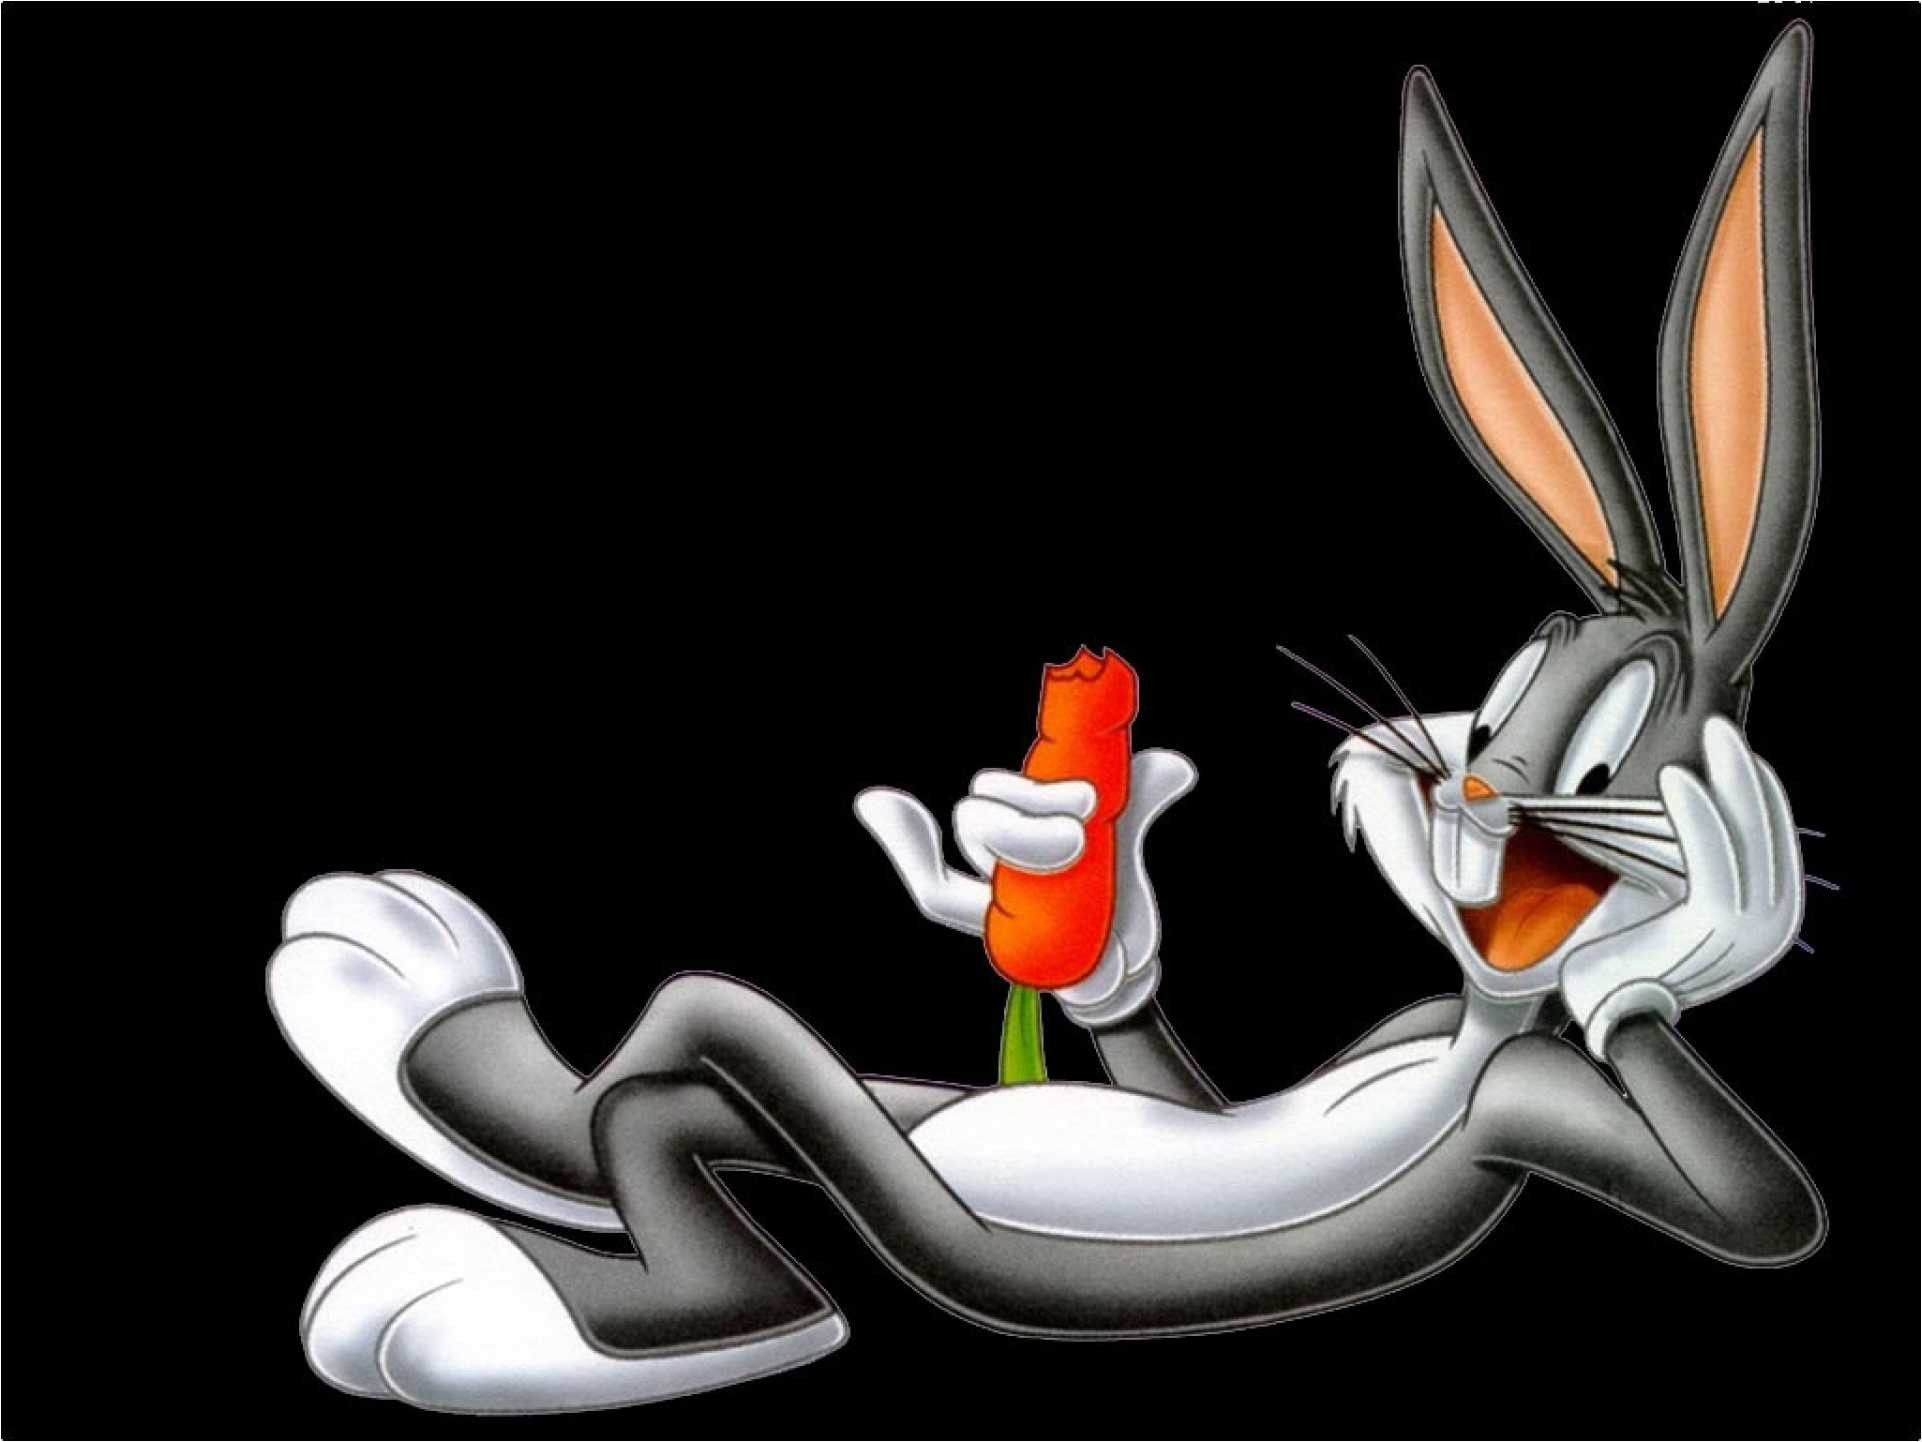 Bugs bunny wallpaper 1920x1080 for android phone - Bugs Bunny